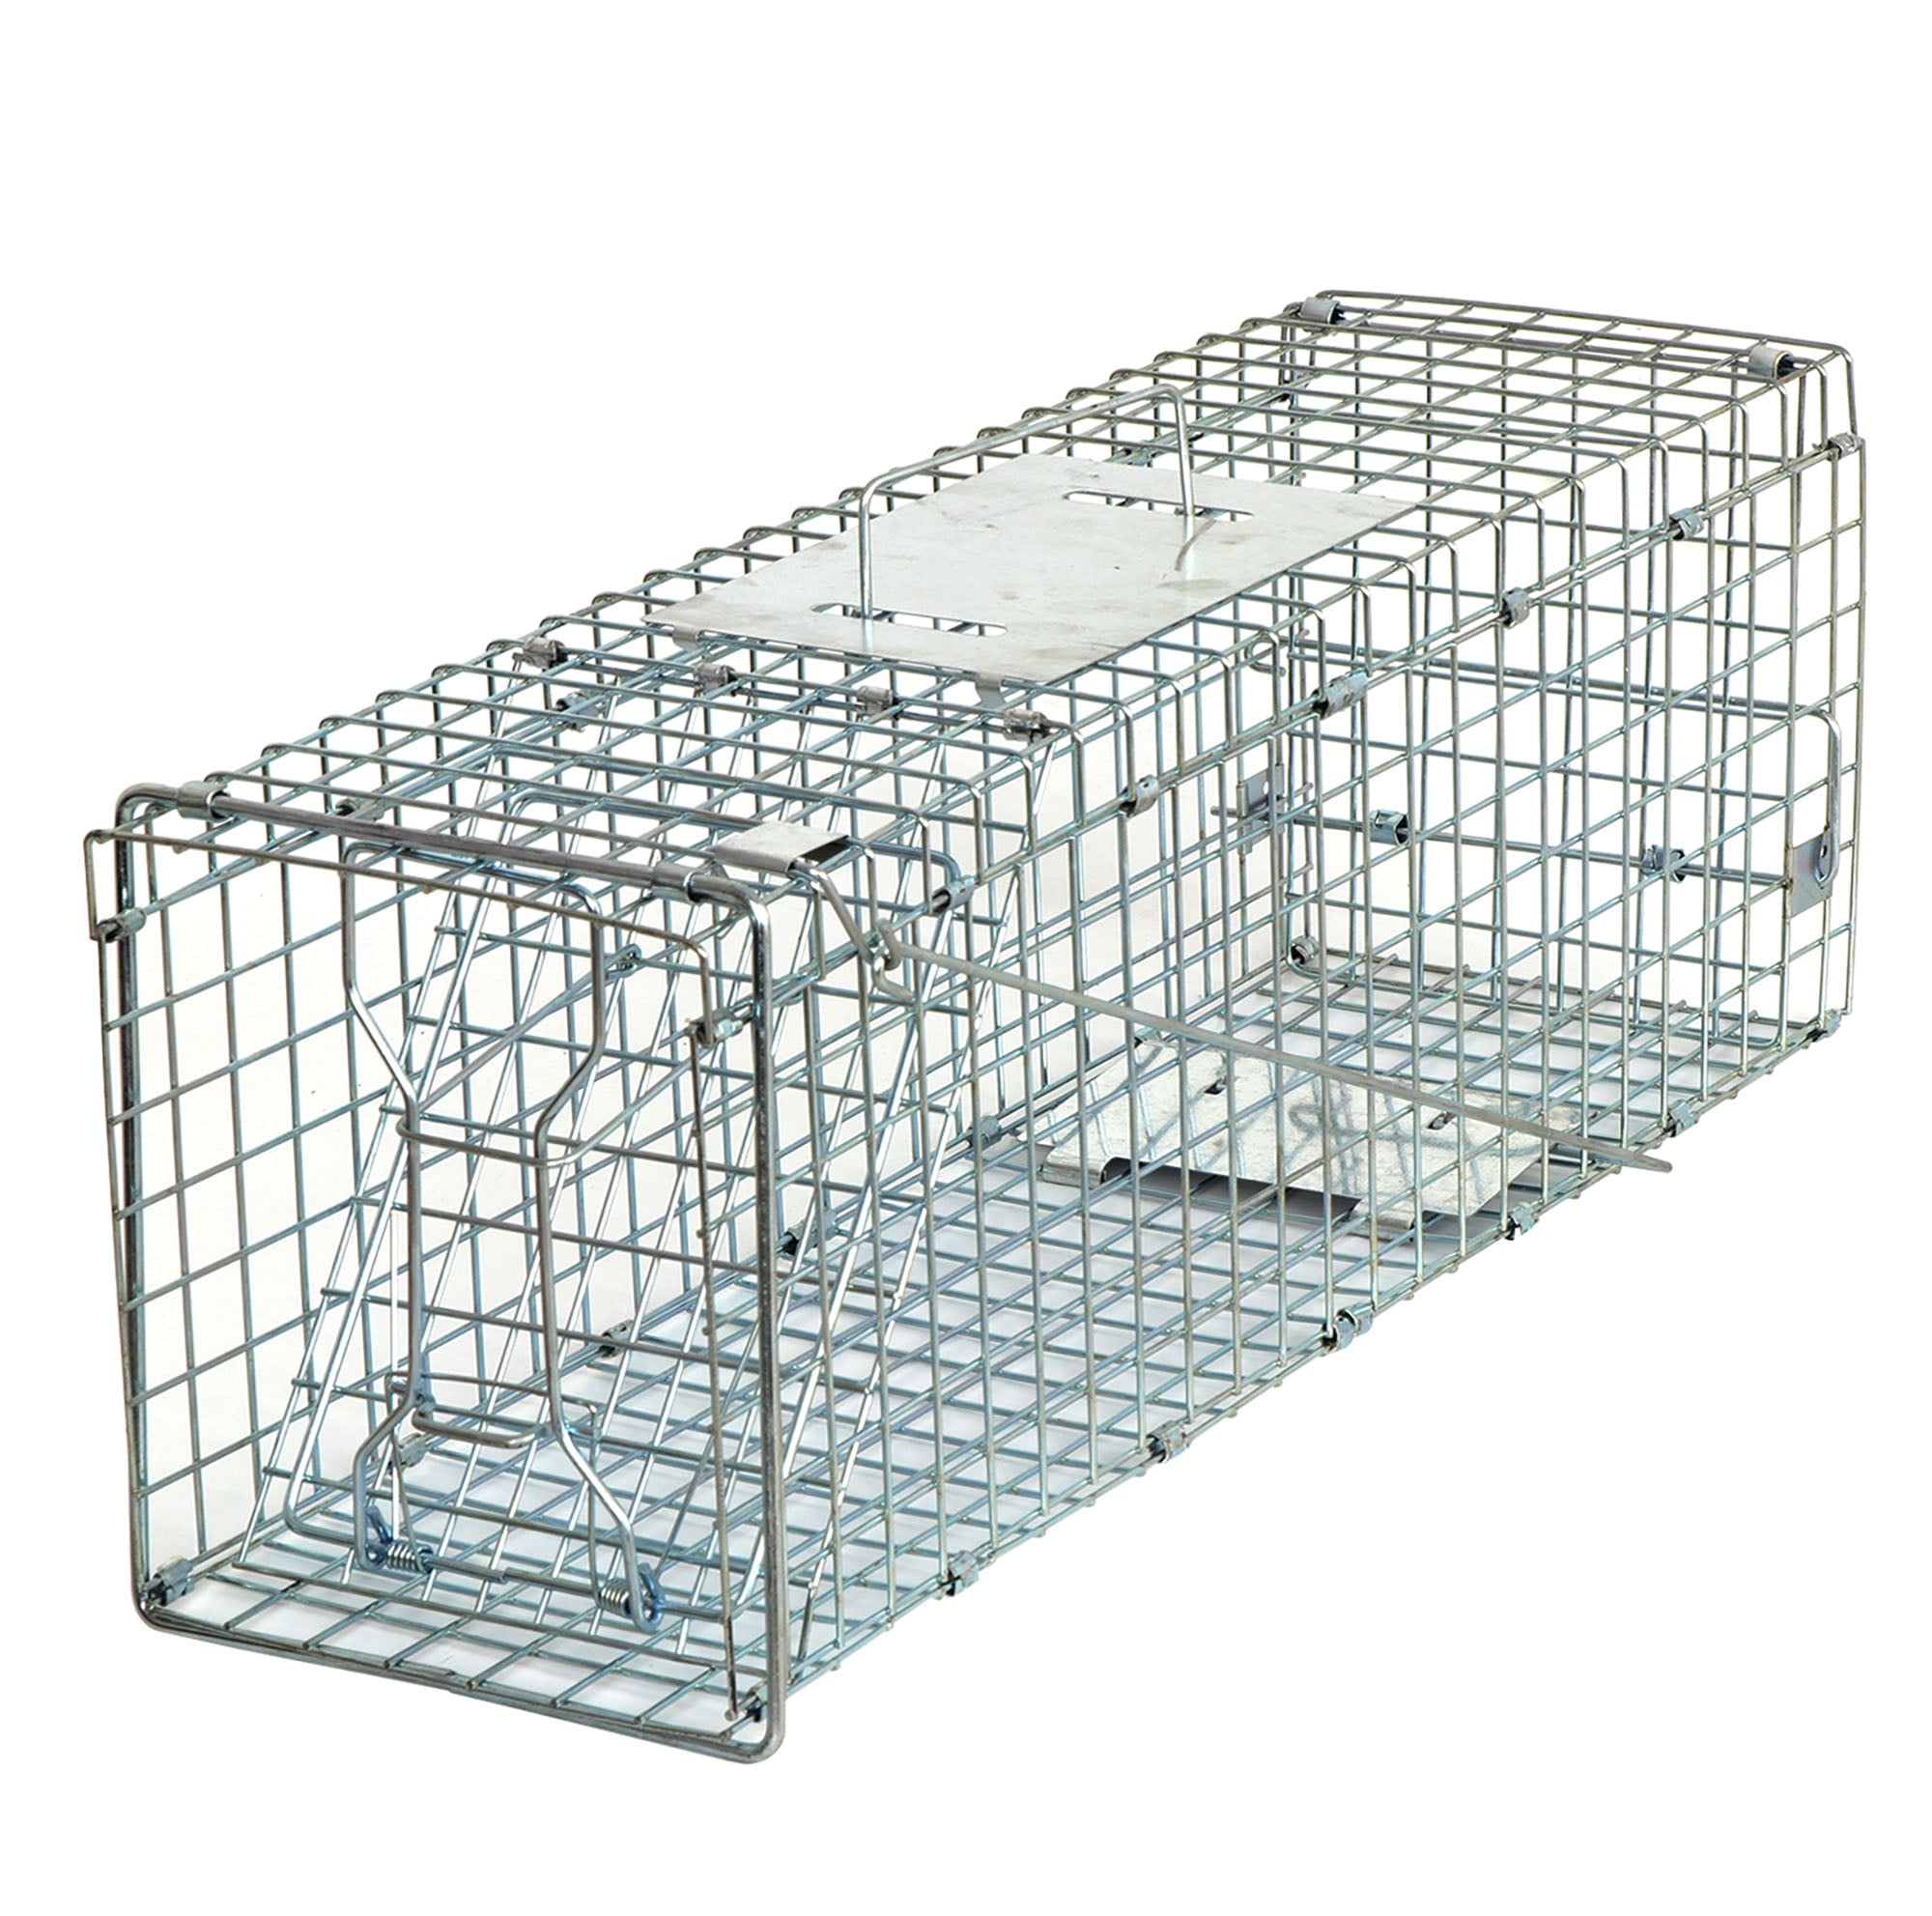 Details about   24'' Humane Animal Trap Steel Cage for Small Live Rodent Control Rat Squirrel 